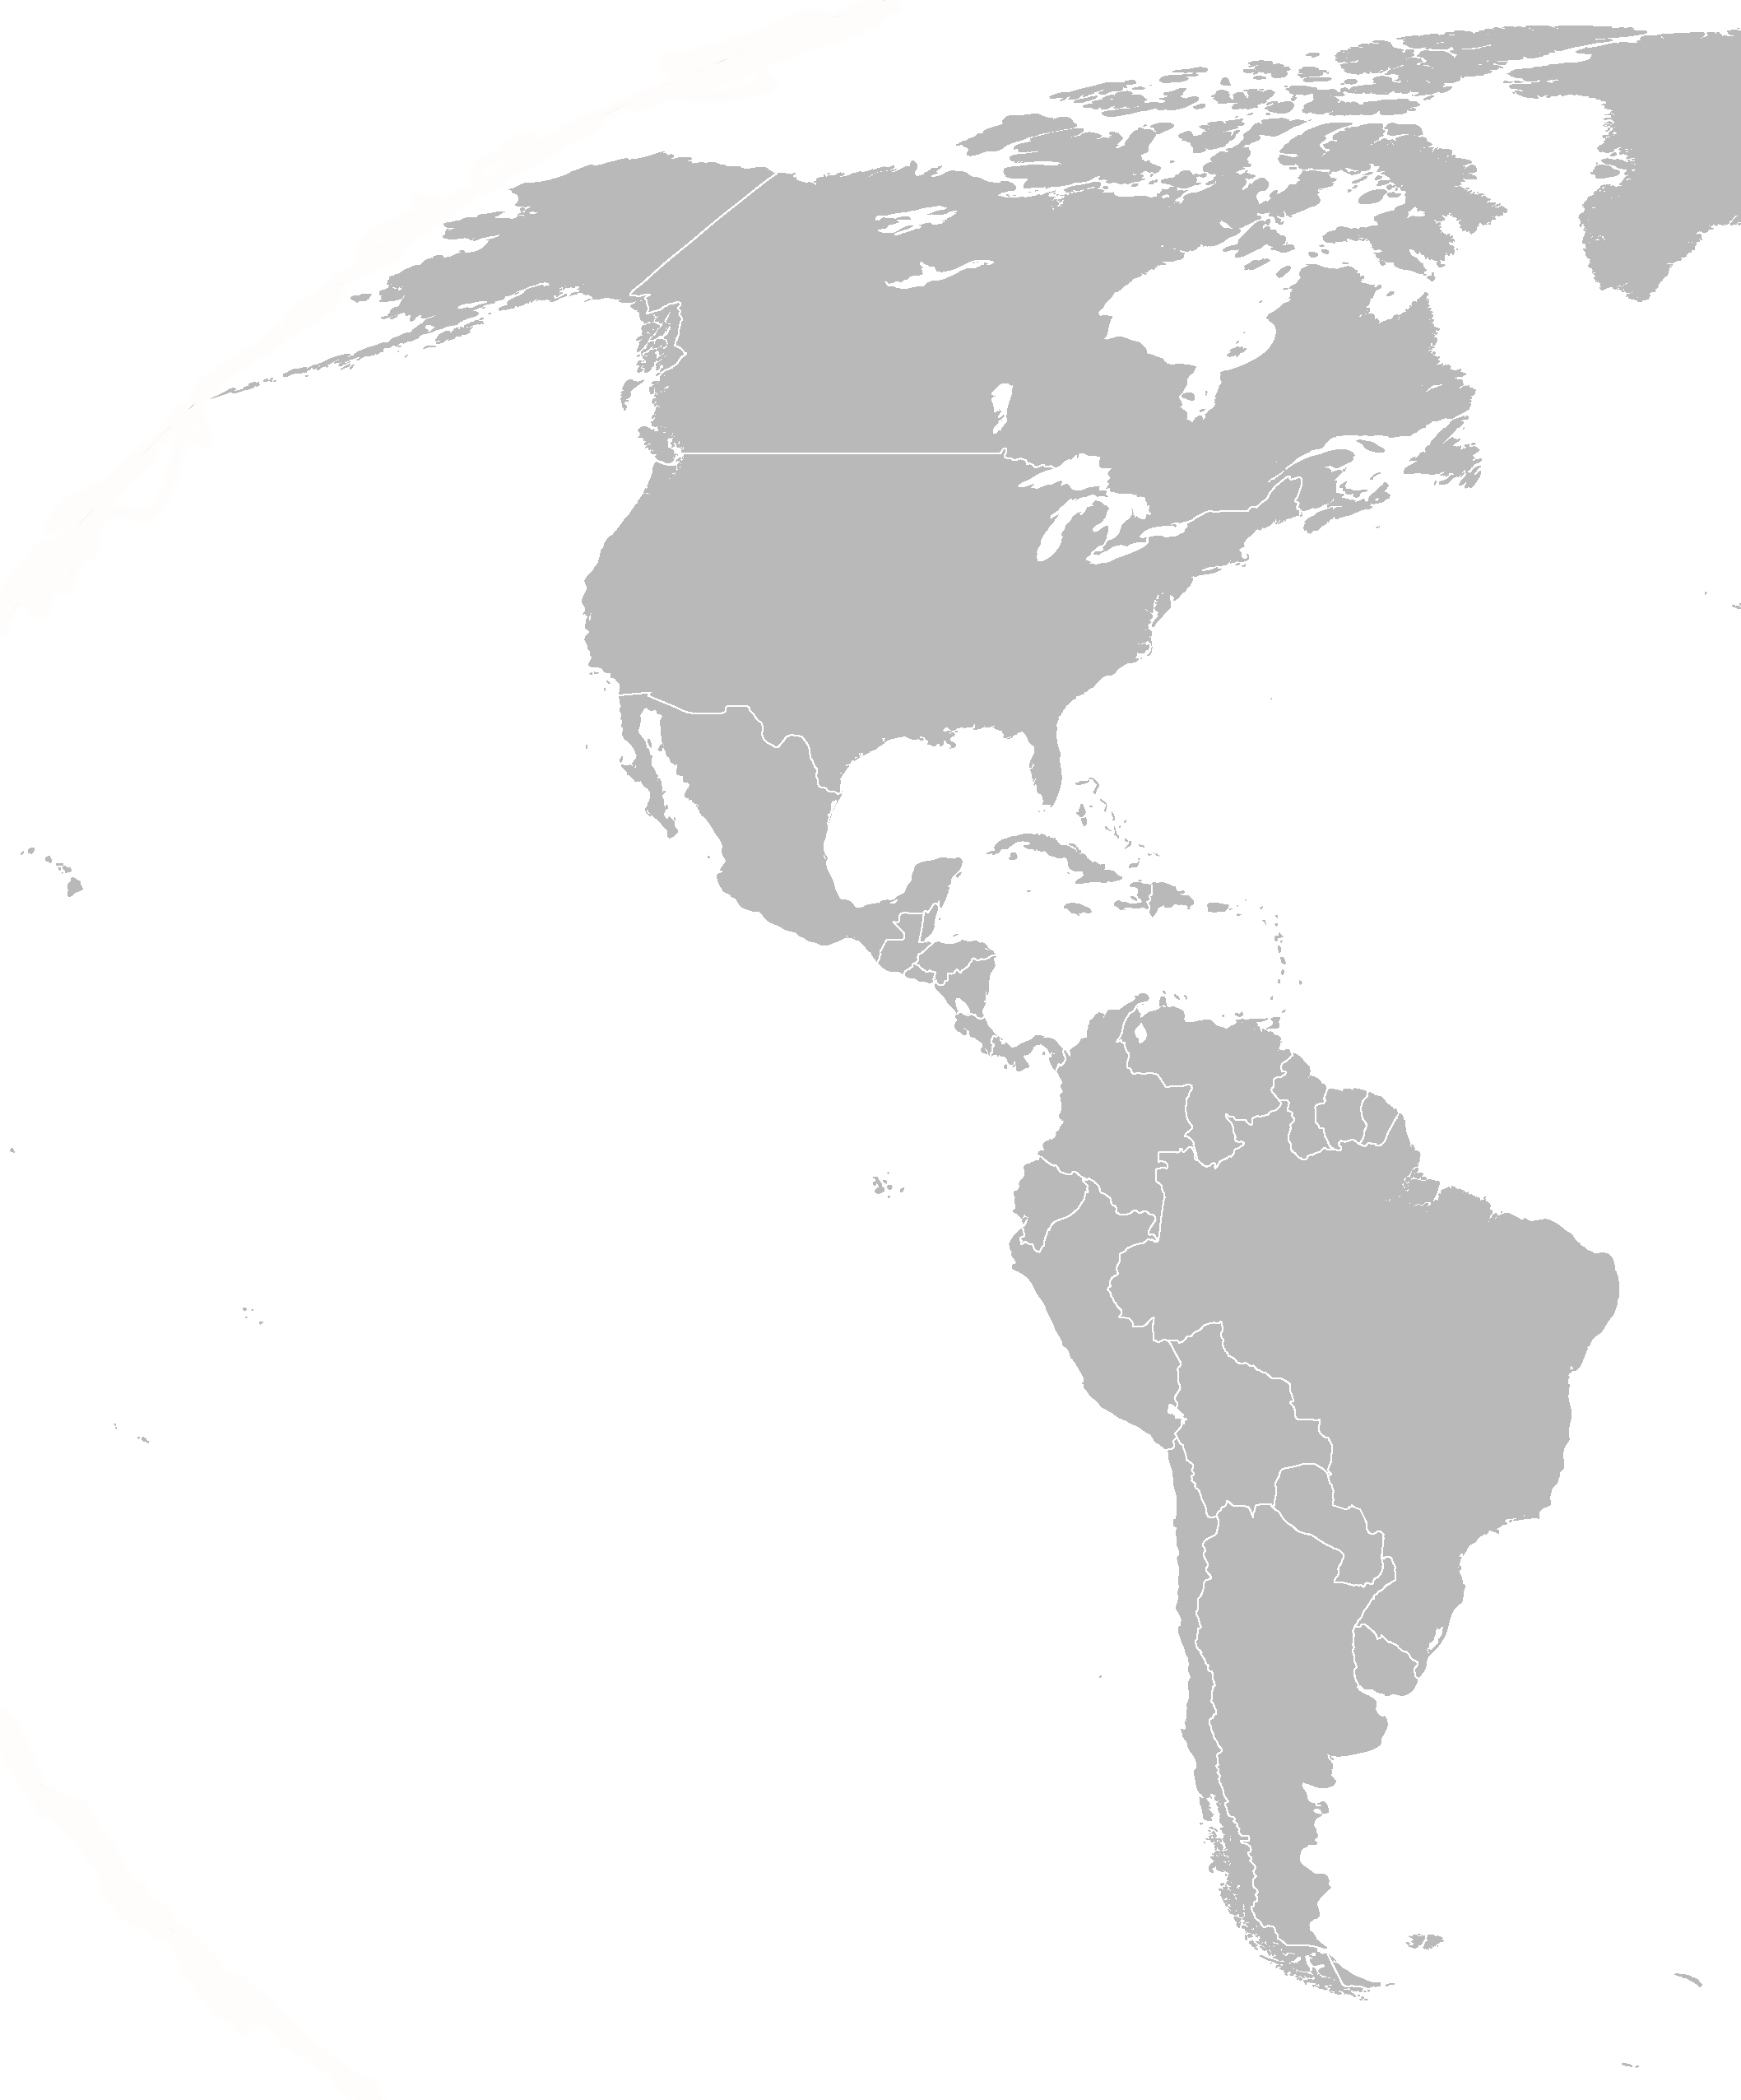 File Blankamericas Png Wikimedia Commons